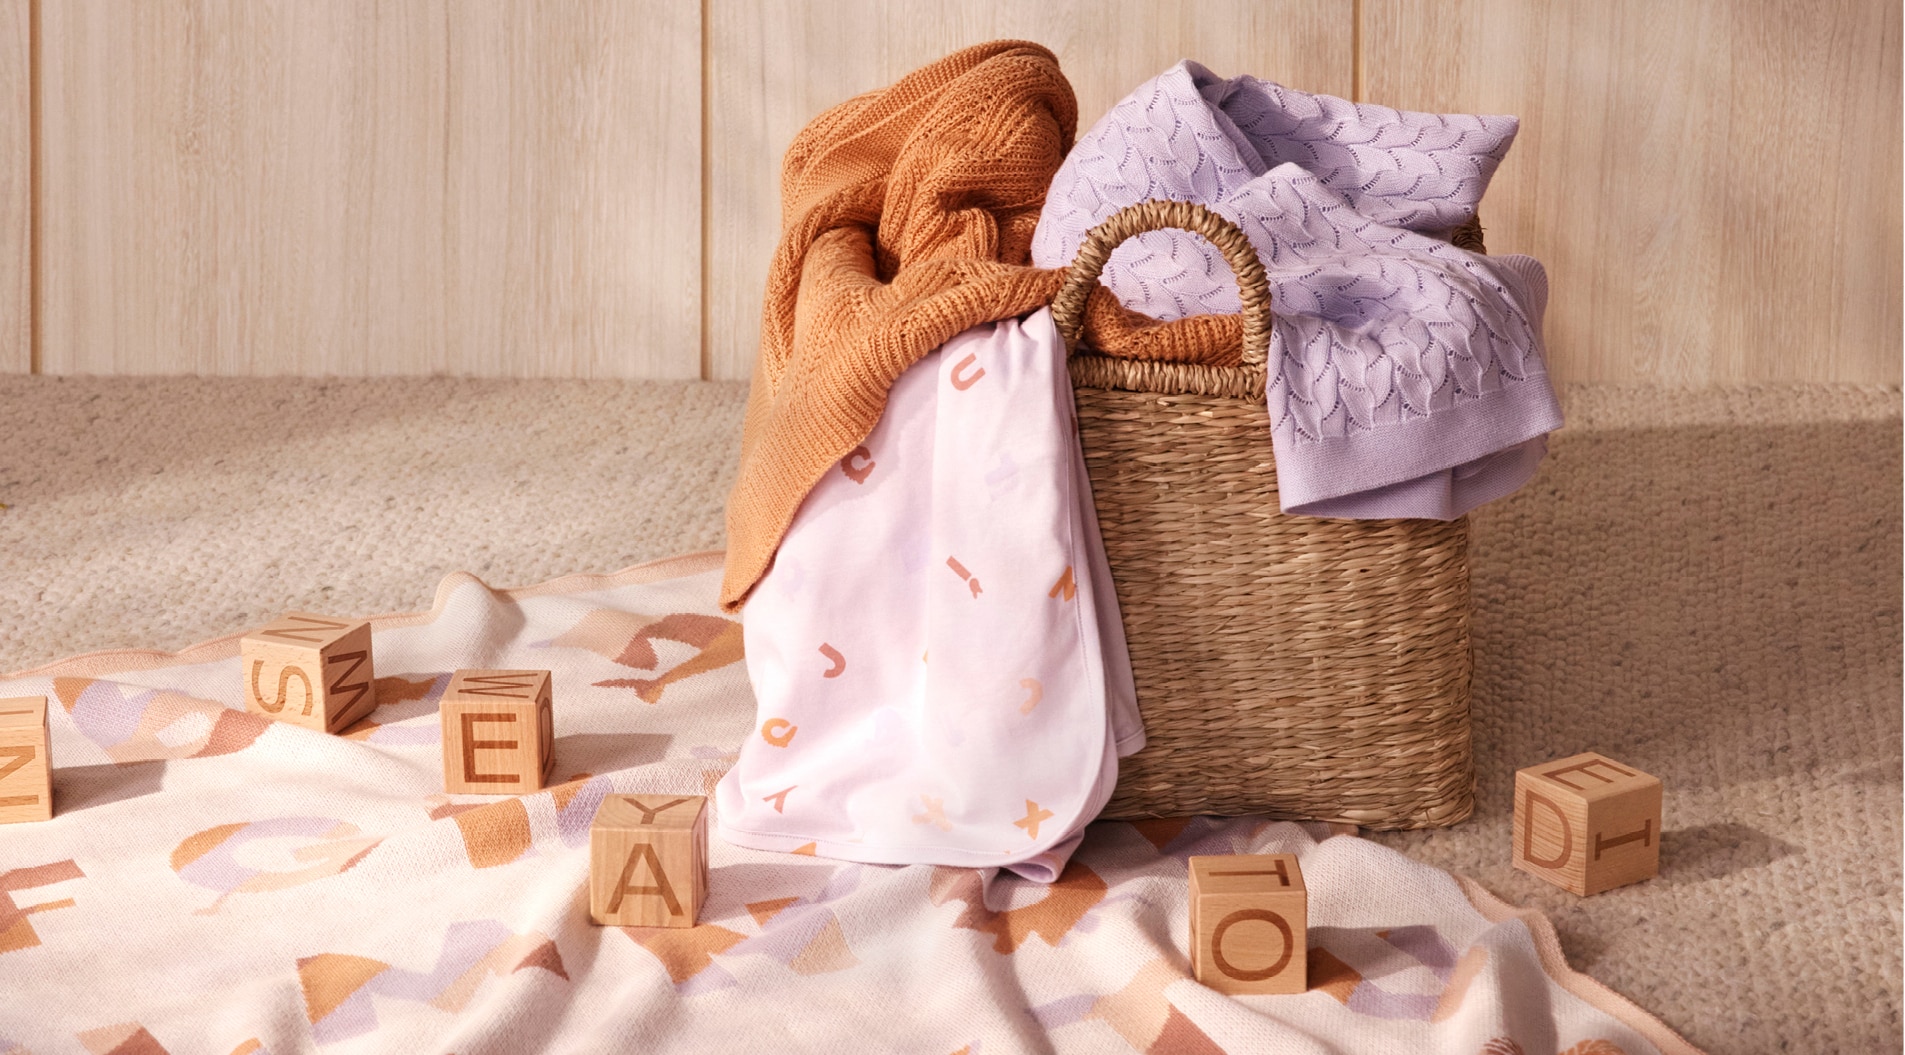 image of baby nursery. letter blocks are scattered across alphabet blanket laid on floor. woven basket contains sheridan blankets, including orange and lilac ones.